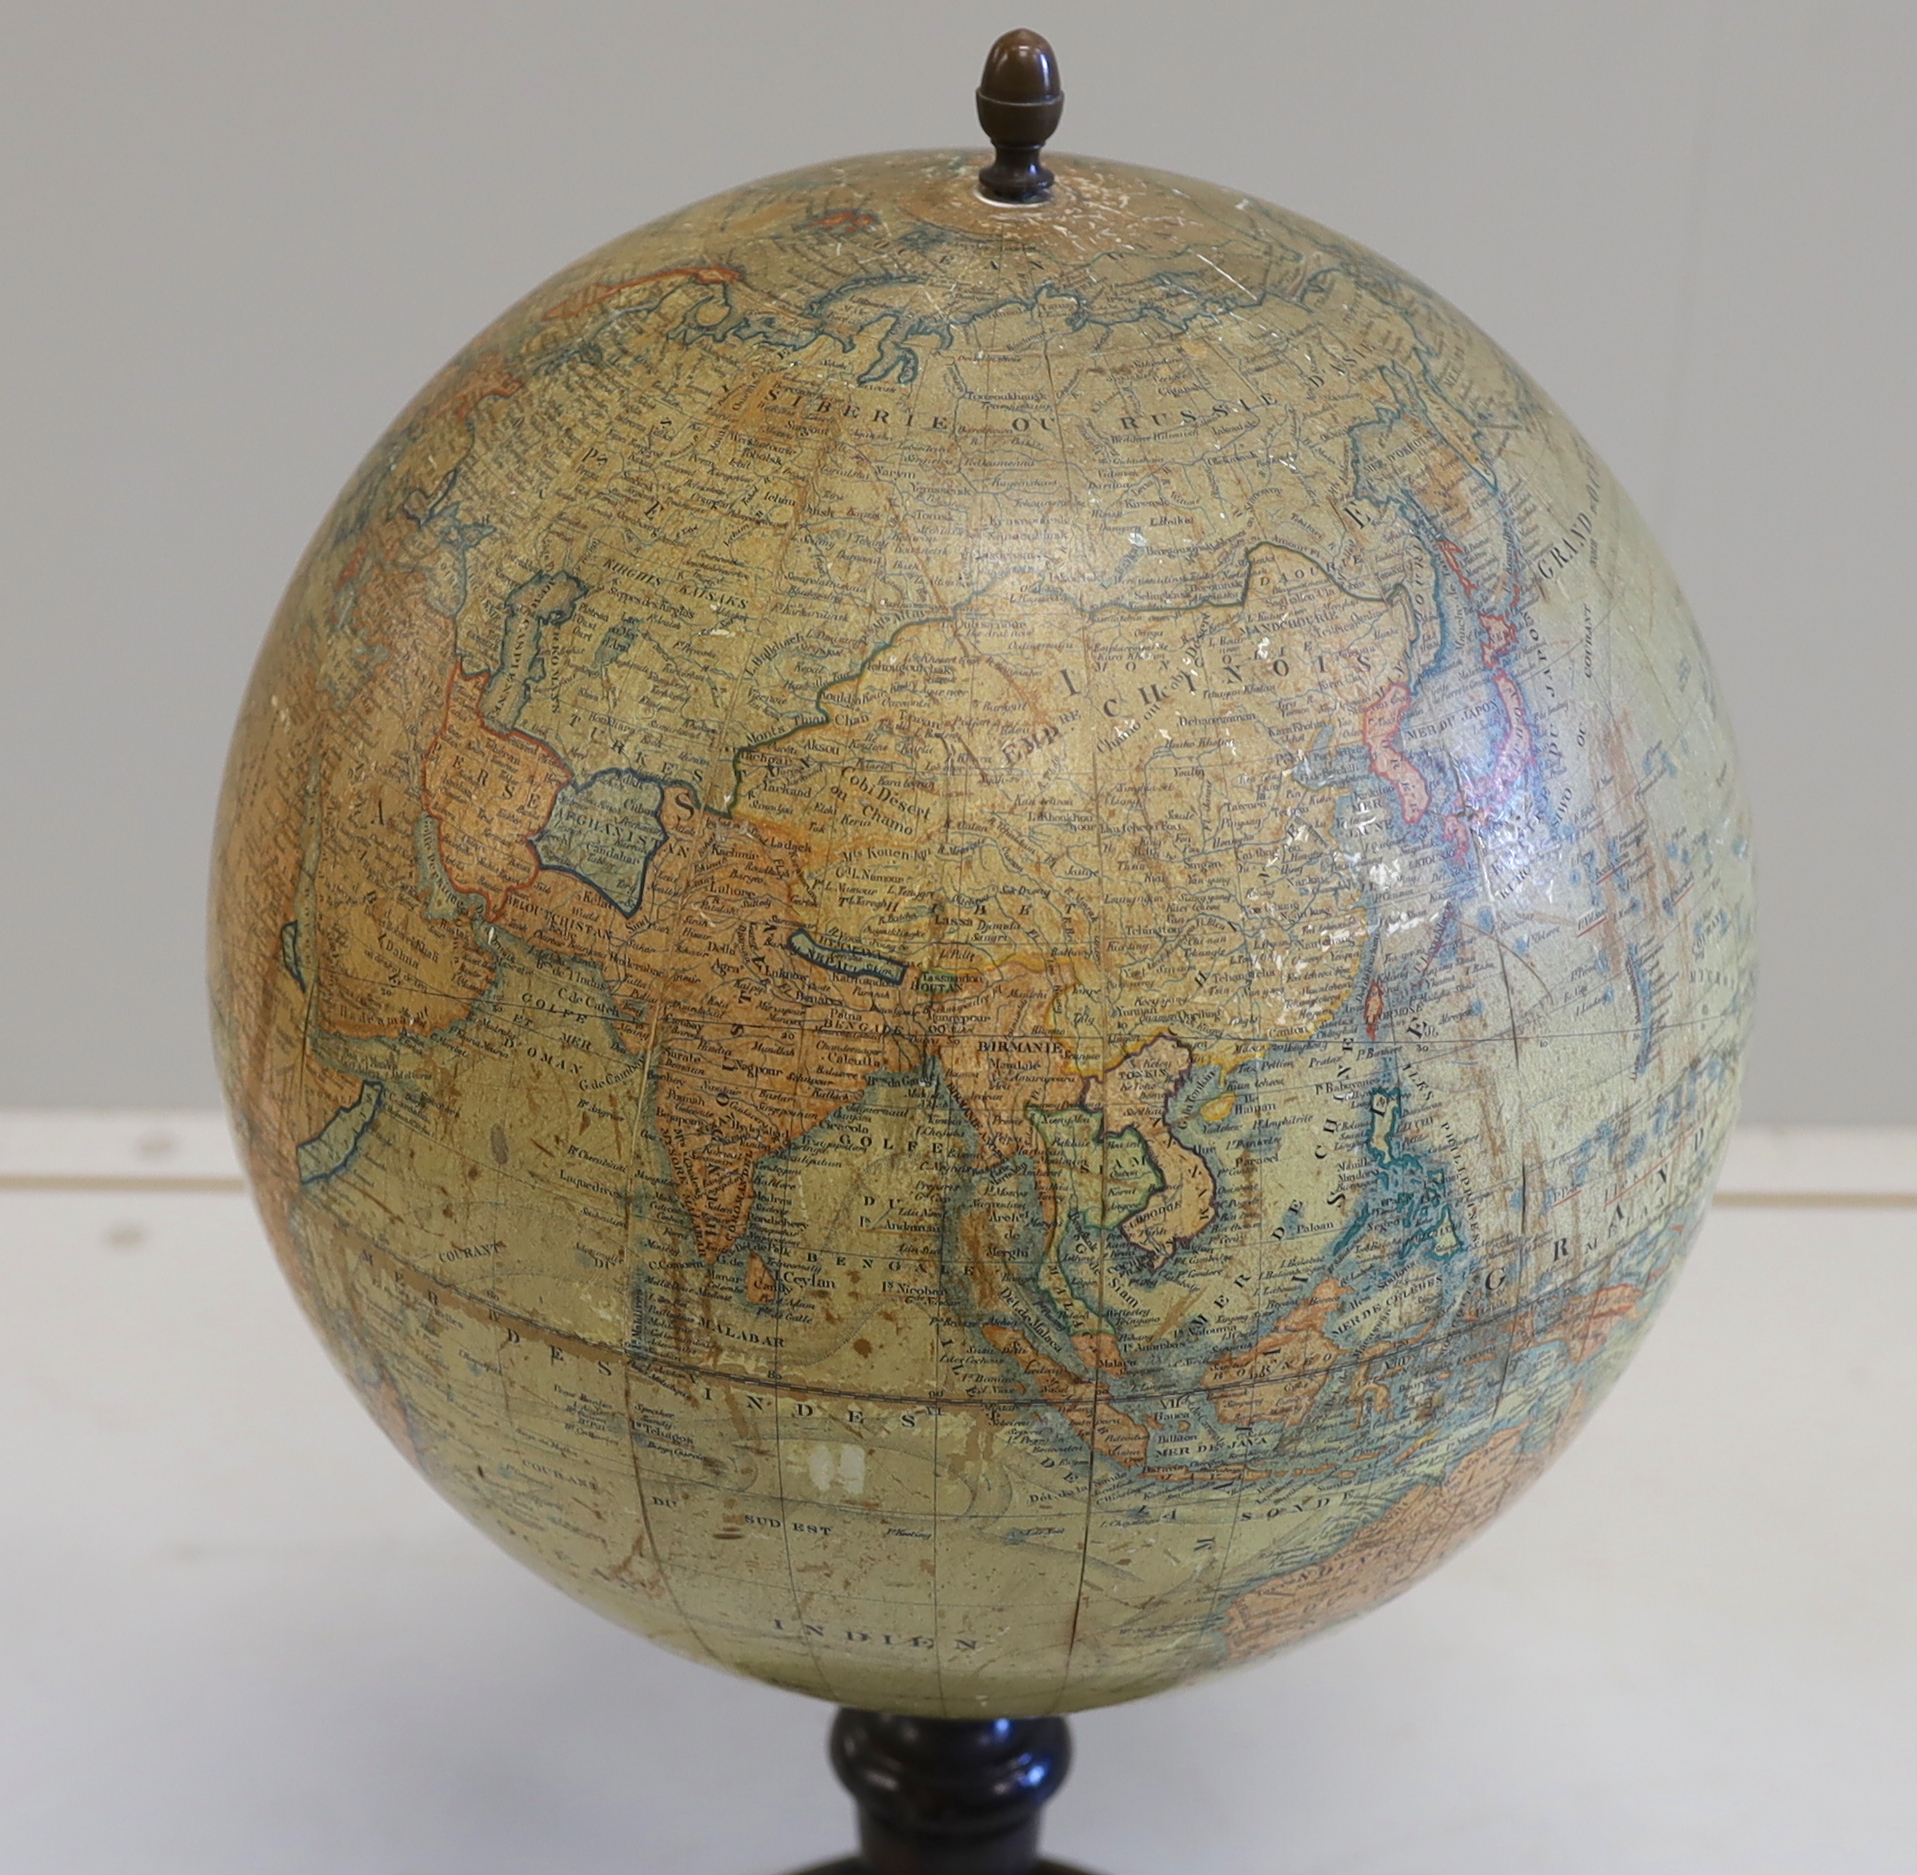 A 19th century 12 inch French globe, ‘Globe Terrestre’ published by J. Lebegue & Cie., Paris, on ebonised pine stand with inset compass, 53cm high on stand